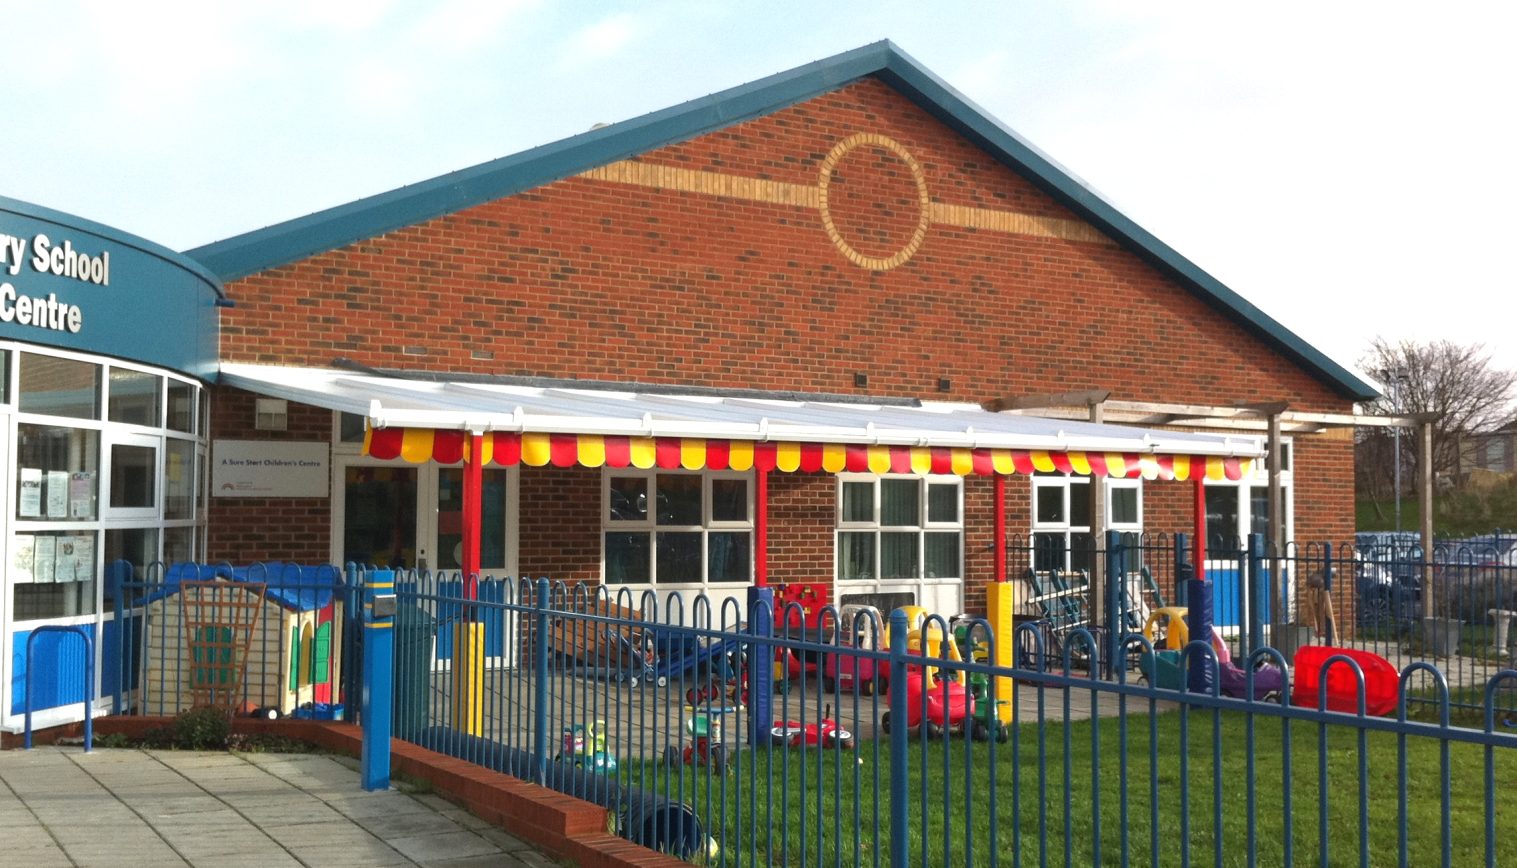 Temple Mill Children’s Centre – Wall mounted canopy